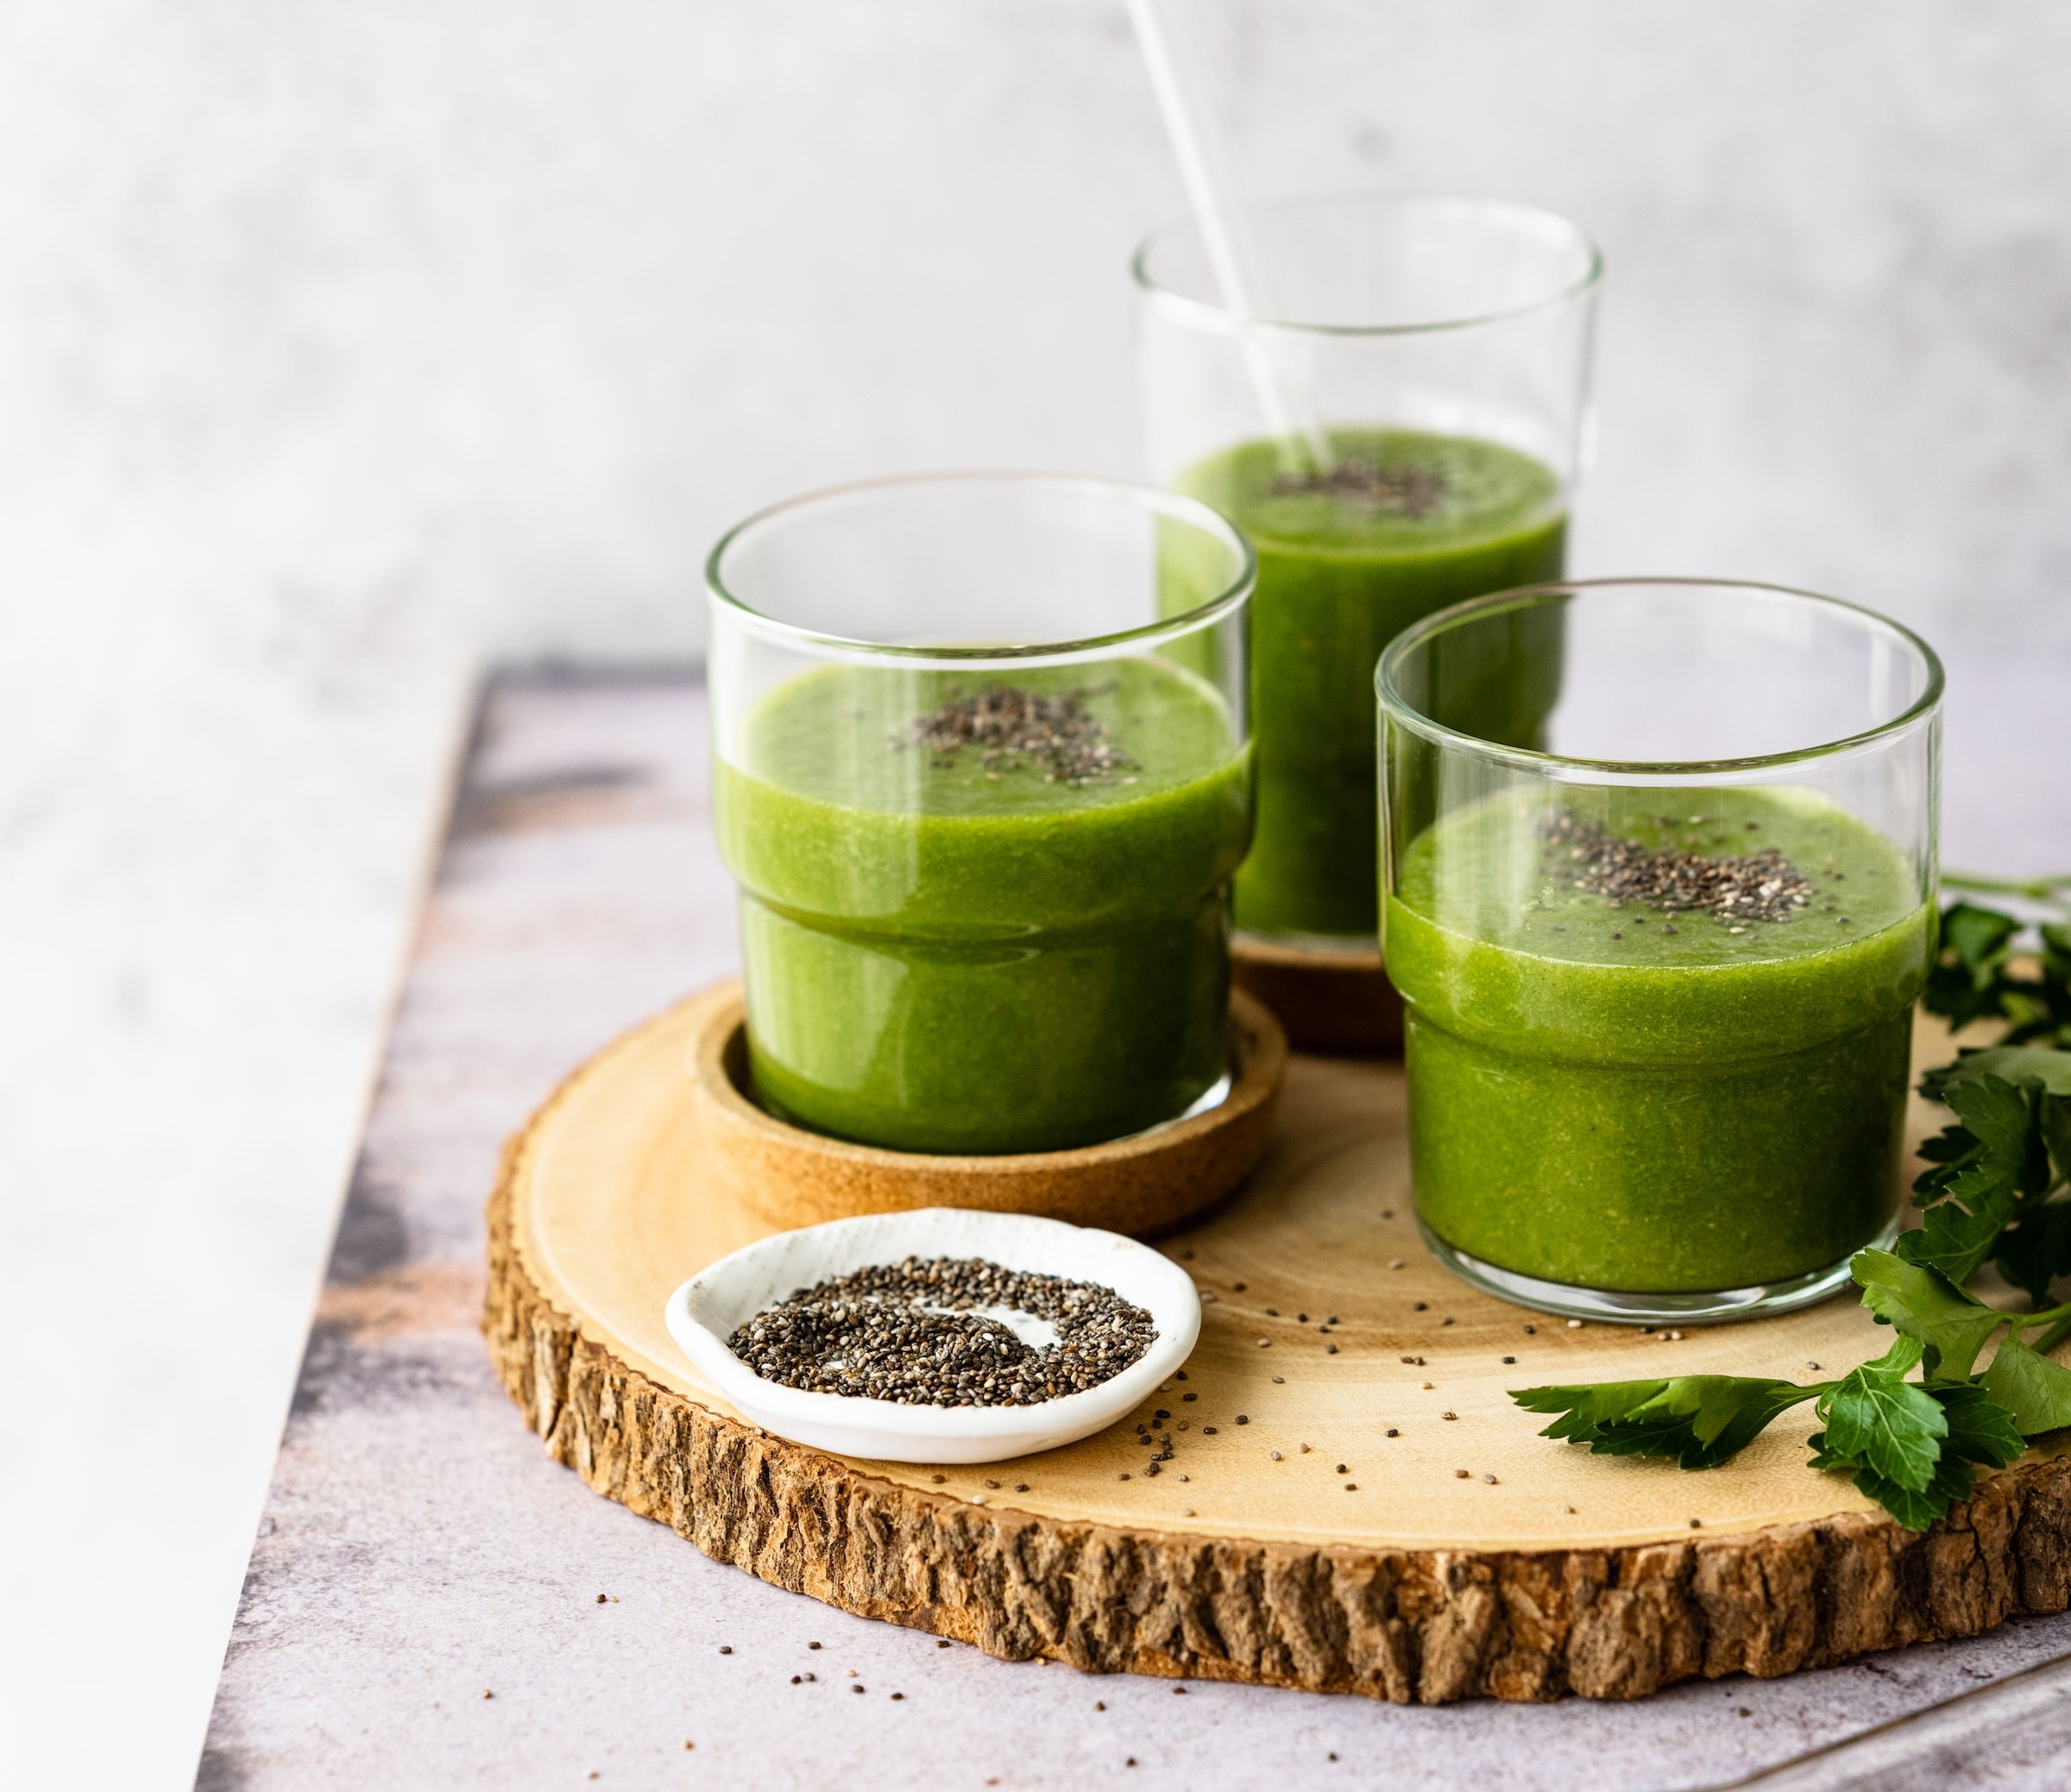 Three glasses of green fruit and vegetable smoothies placed on a wooden board. Chia seeds have been sprinkled into the smoothies and across the board. The board is dressed with some parsley leaves.